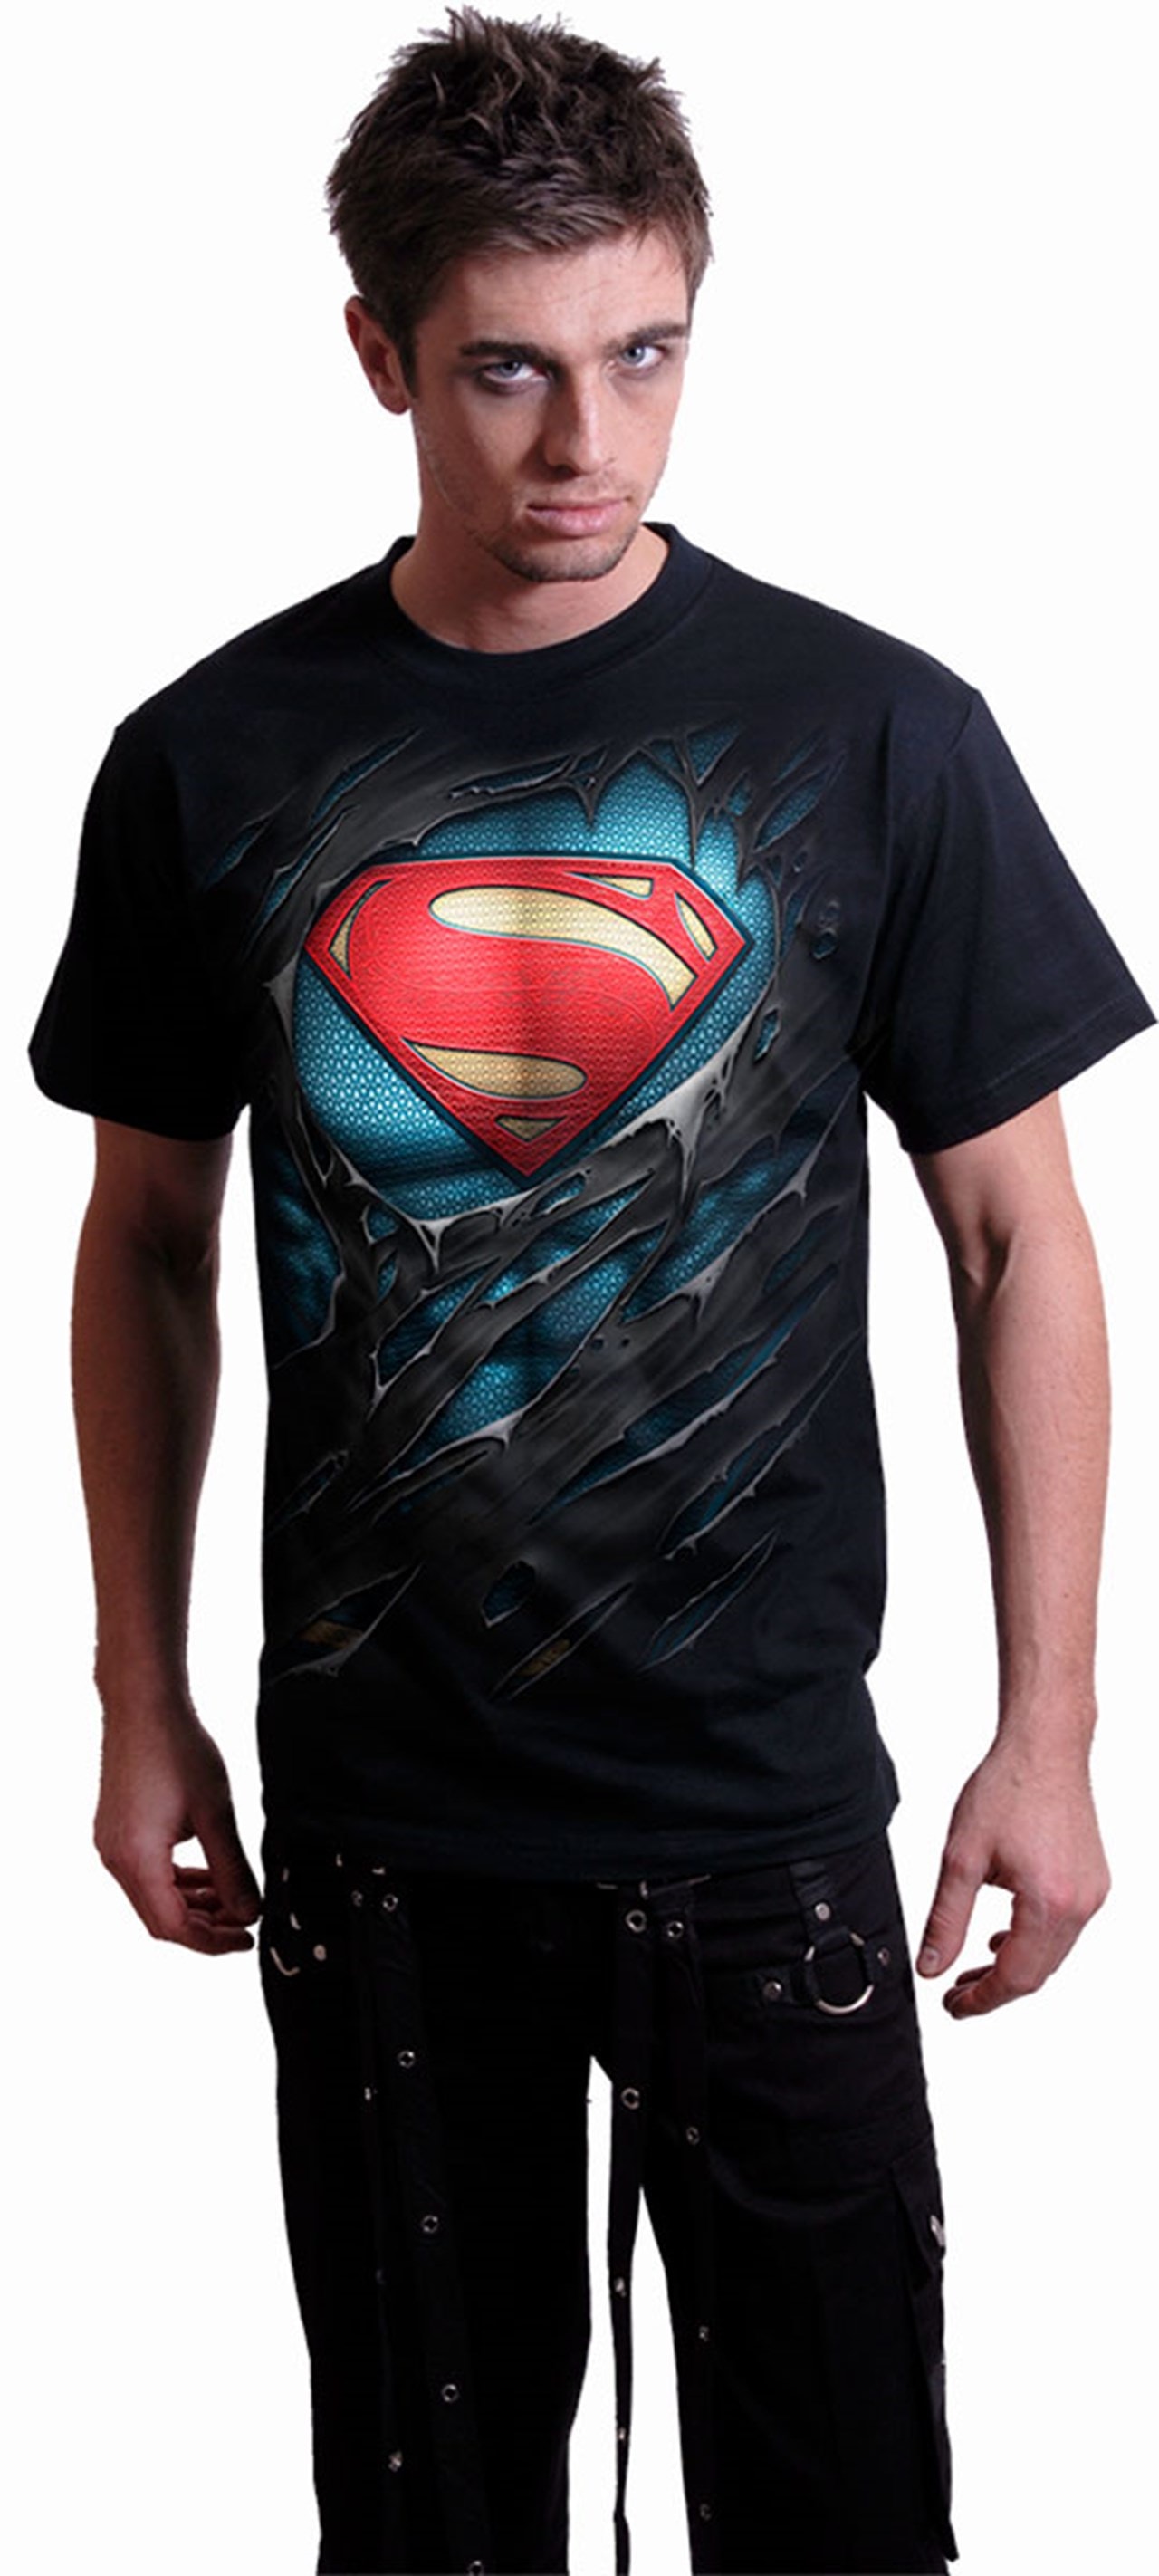 Superman Ripped Spiral Tee | T-Shirt | Free shipping over £20 | HMV Store